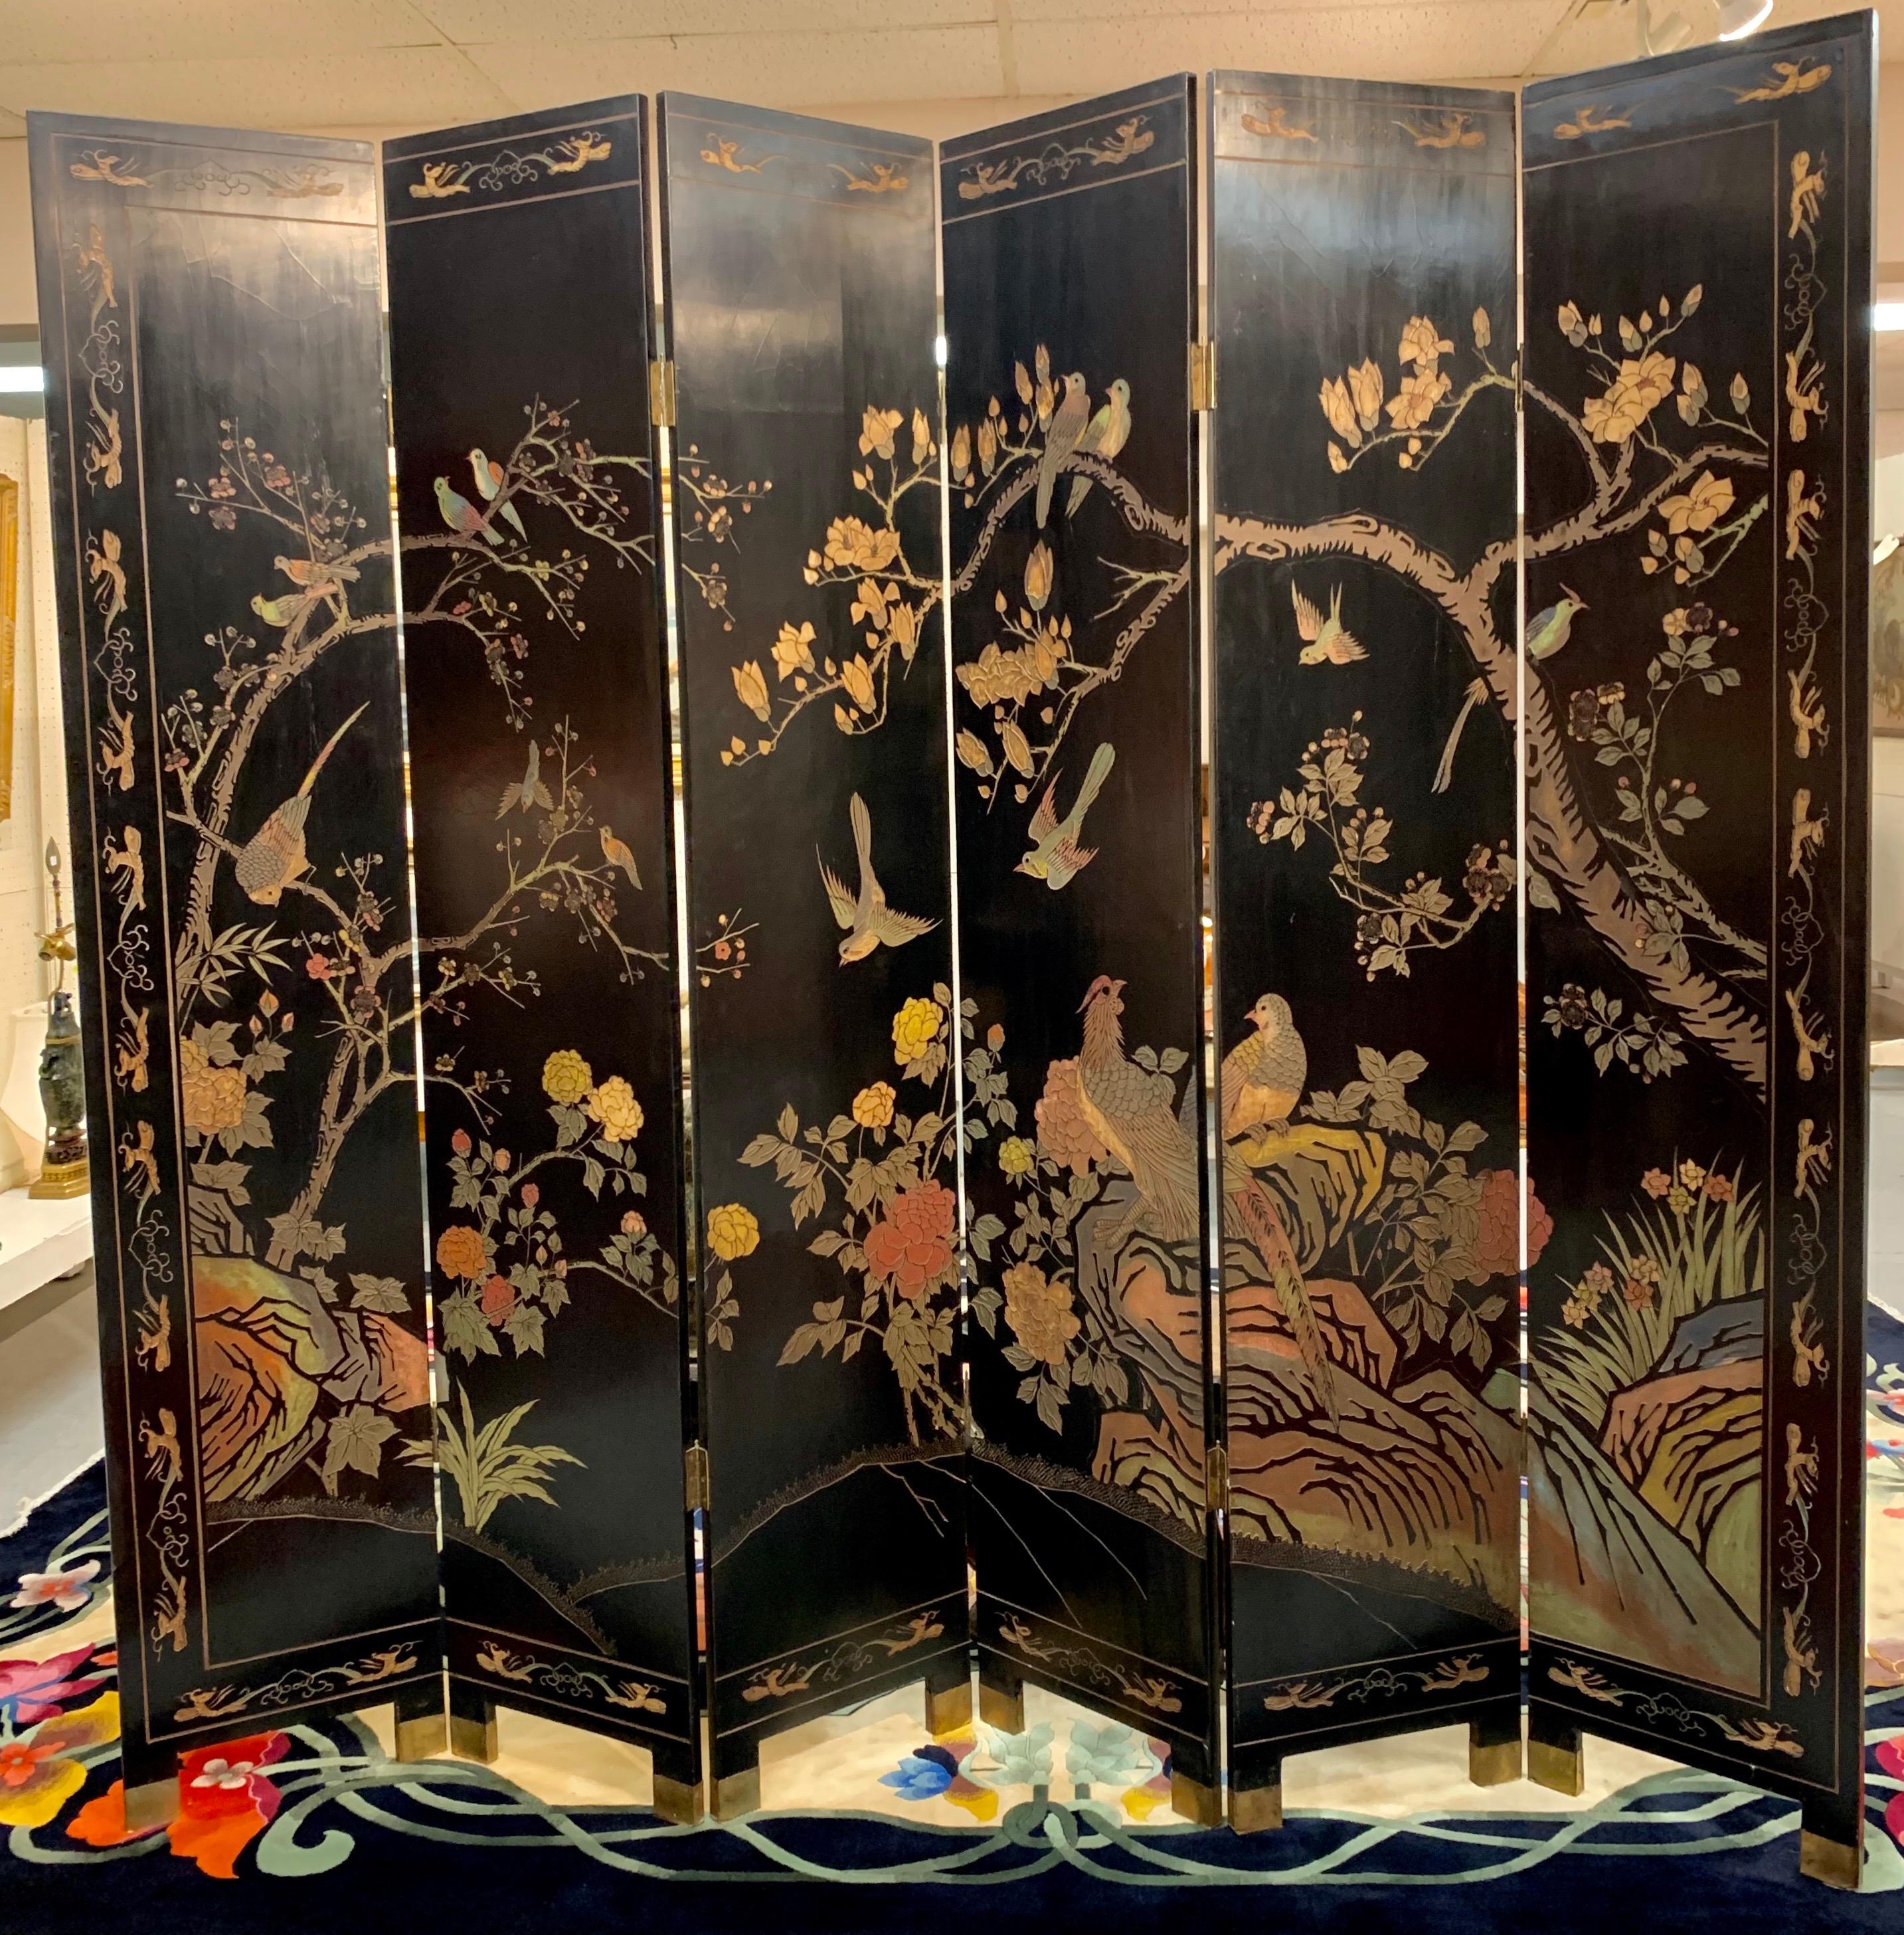 Magnificent seven foot tall six panel chinoiserie coromandel screen that is double sided and features lacquered wood with carved designs on both sides. Hints of many colors on each side and featuring two brass capped feet on each panel. One side